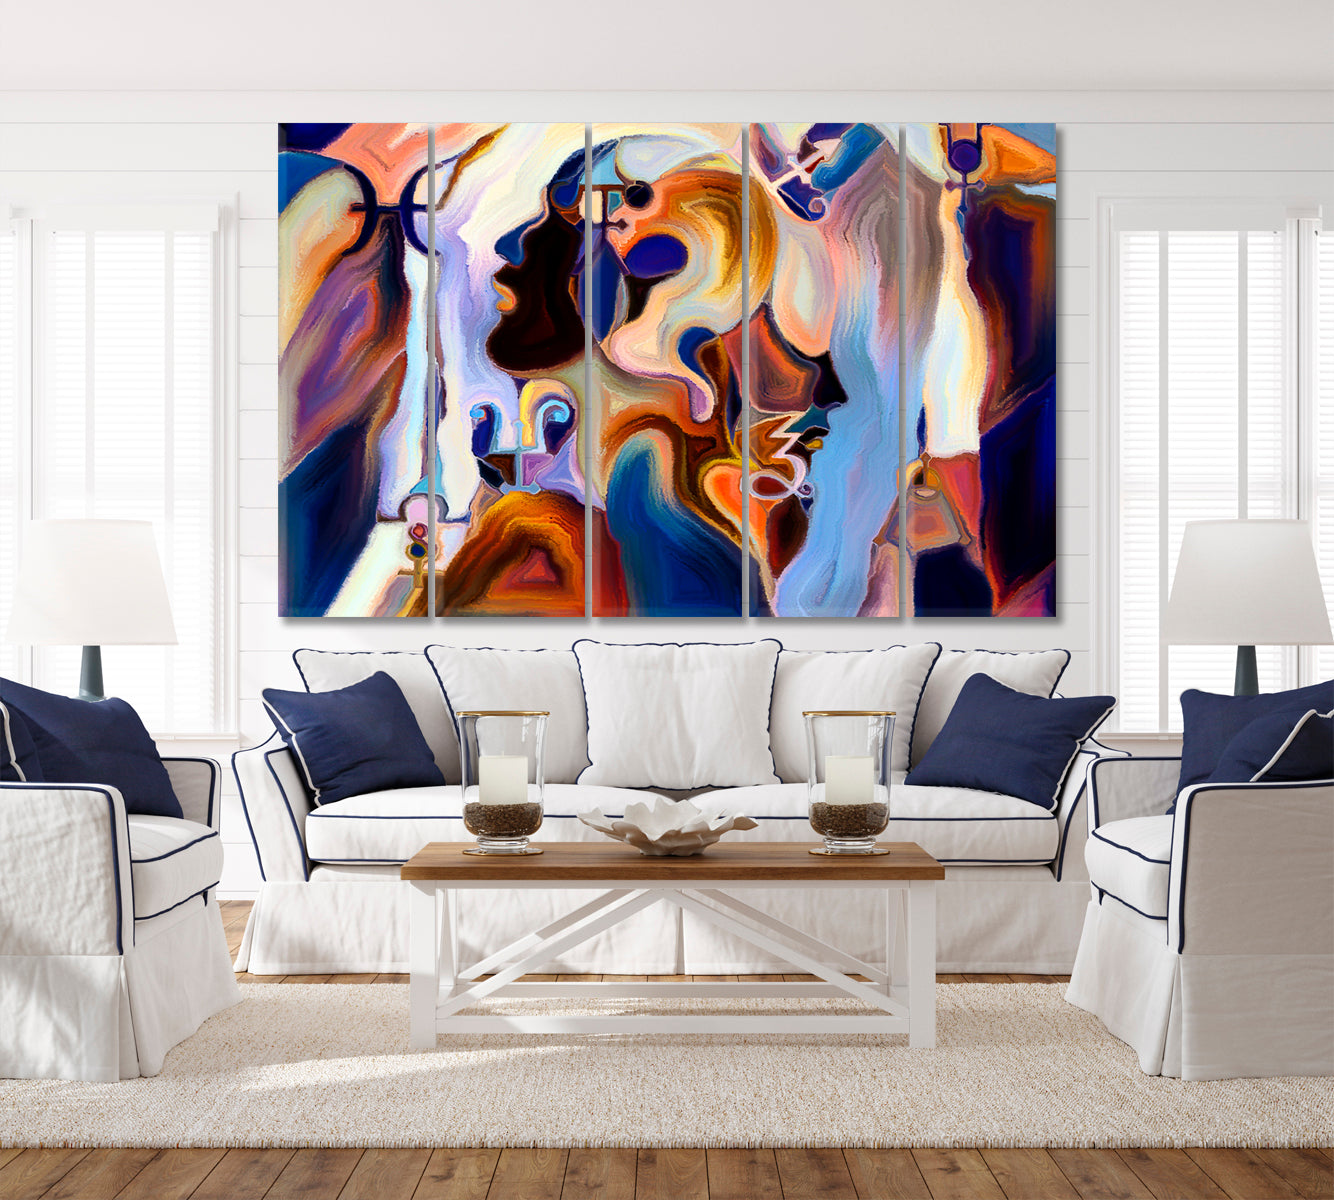 Chasing the Dream Abstract Art Print Artesty 5 panels 36" x 24" 